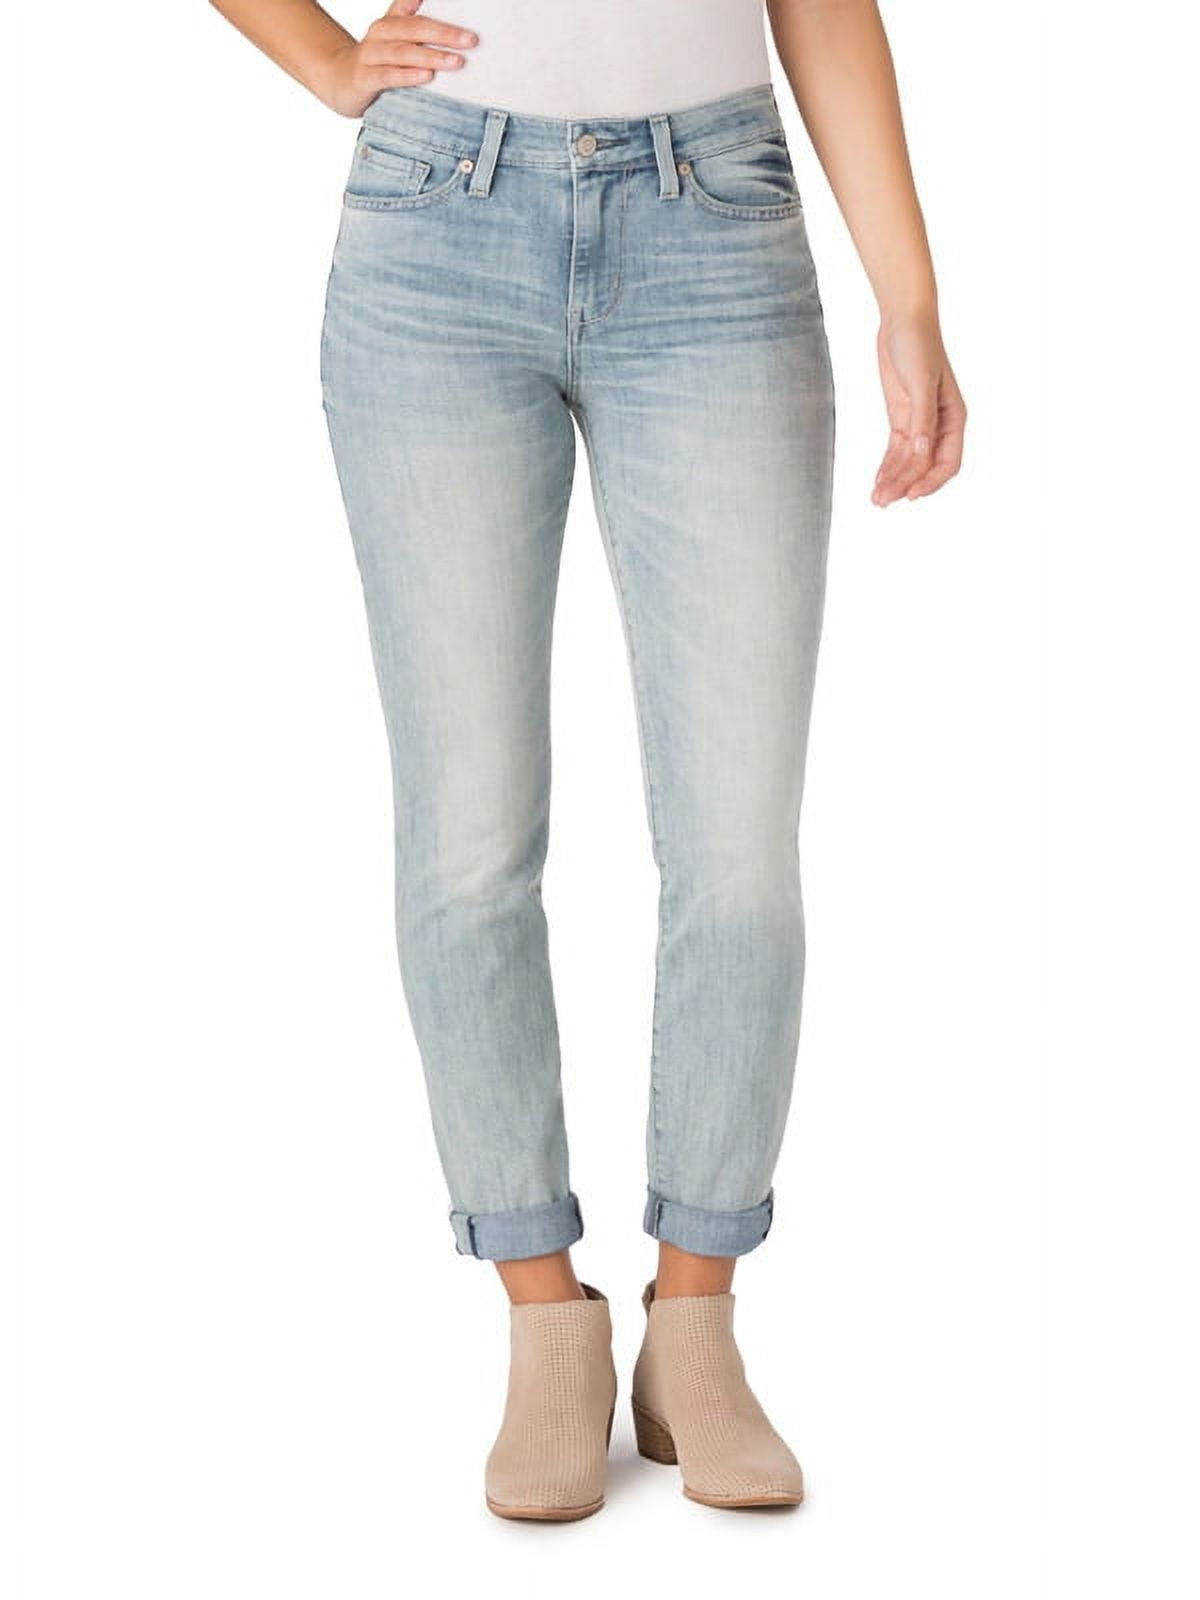 Signature by Levi Strauss & Co. Women's Mid Rise Slim Cuffed Jeans